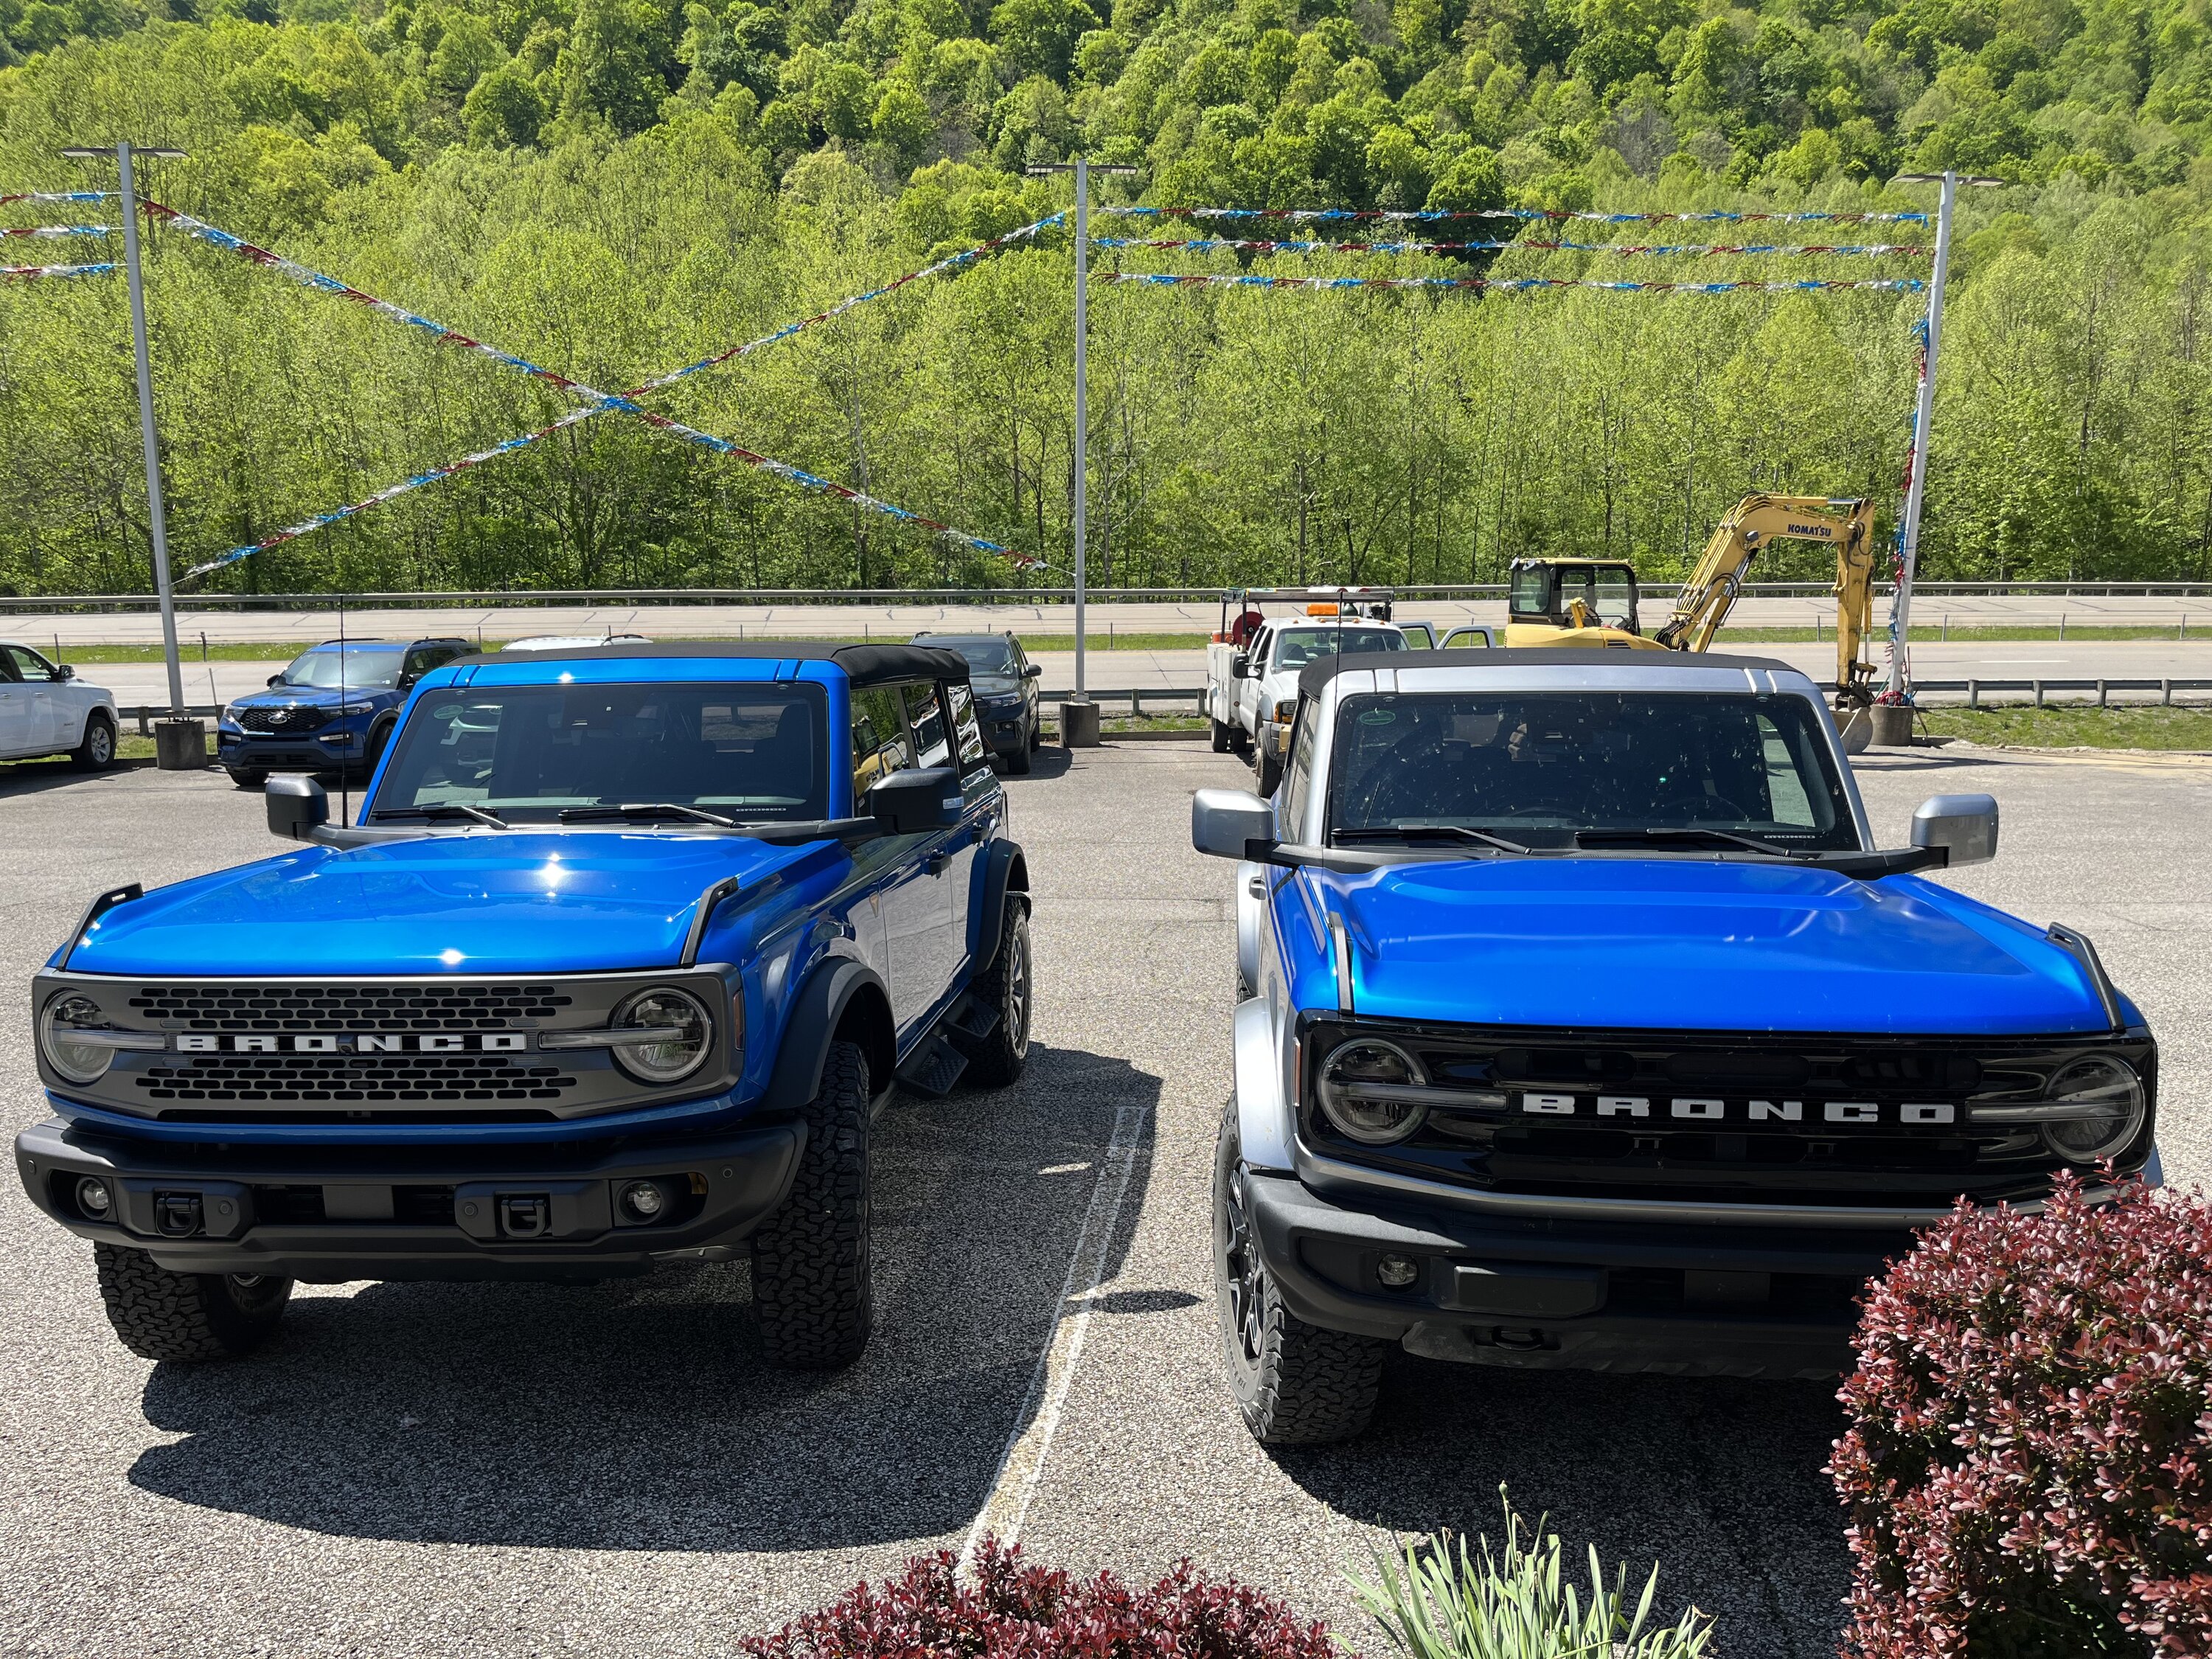 Ford Bronco The Plan & Offer - Stephens Auto Center's Mid Atlantic Bronco Connection 1683318201017